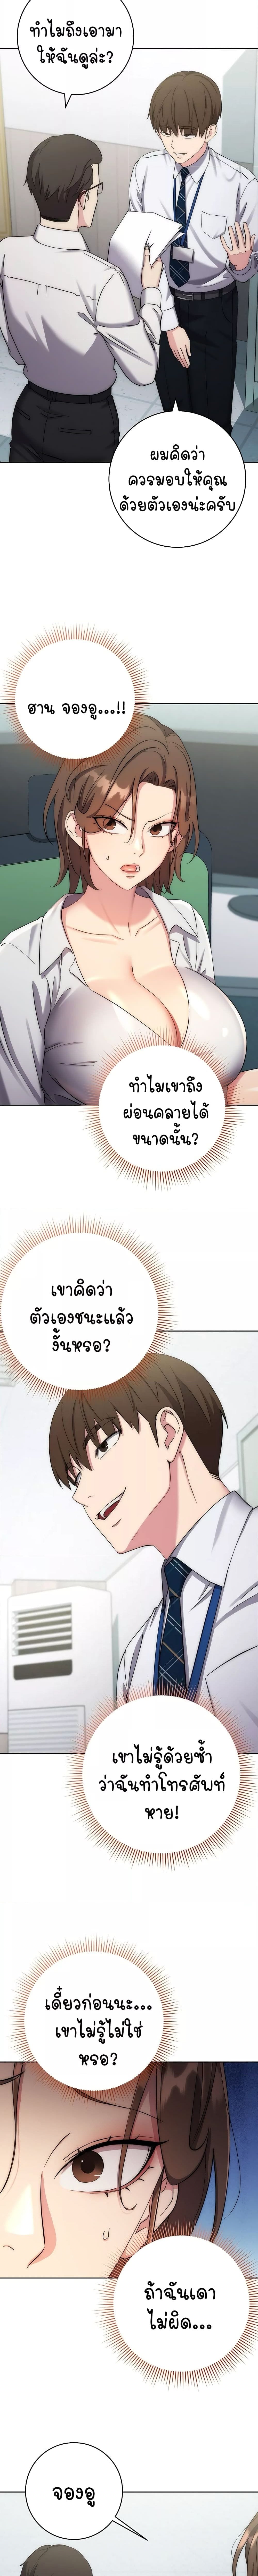 Outsider: The Invisible Man ตอนที่ 11 ภาพ 12